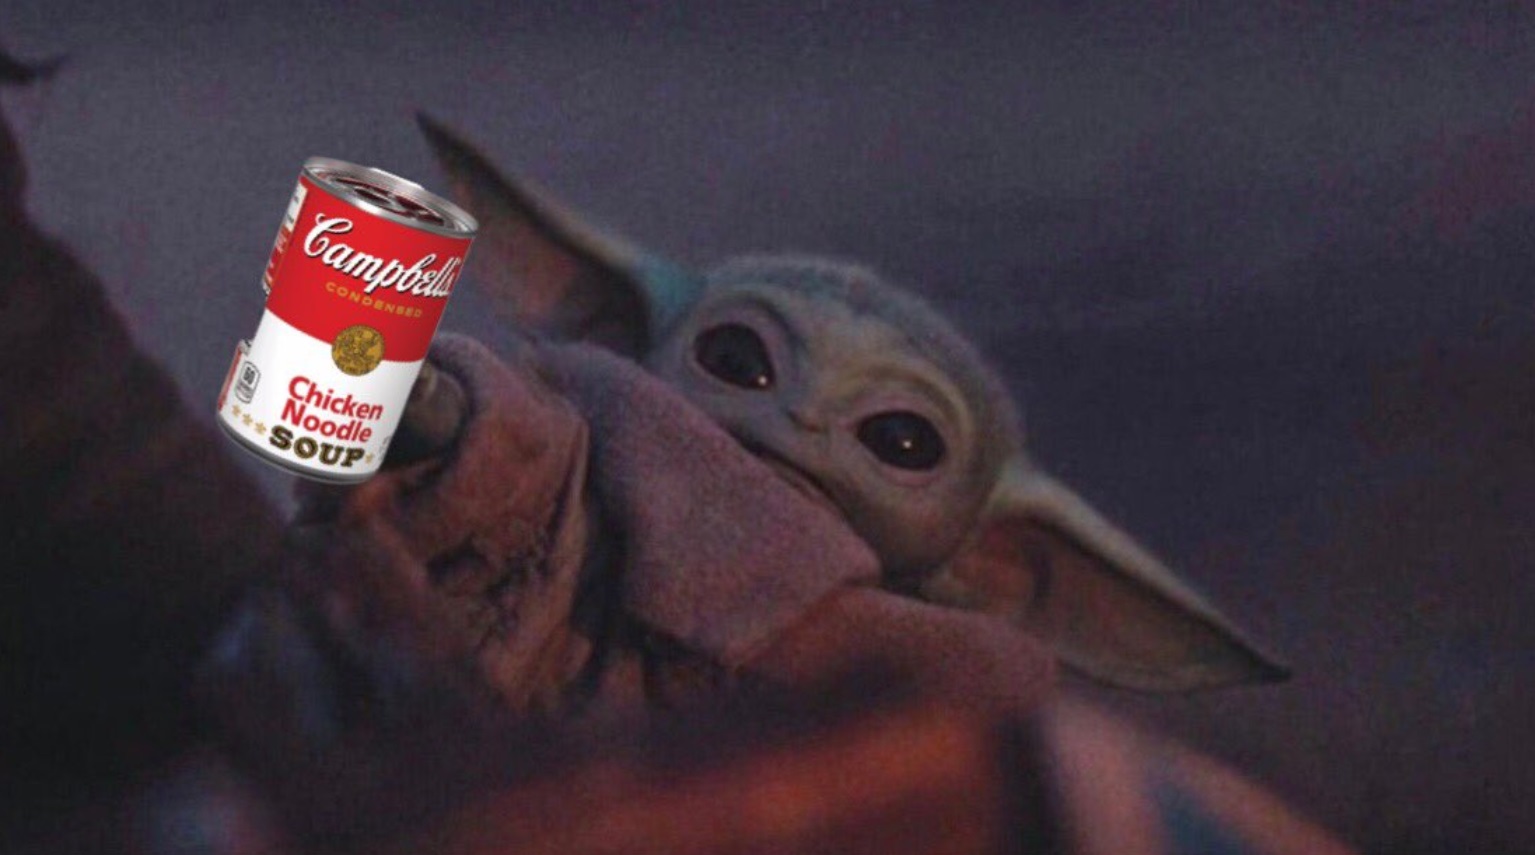 PHOTO Baby Yoda Handing You Campbell's Chicken Noodle Soup During Corona Virus Outbreak